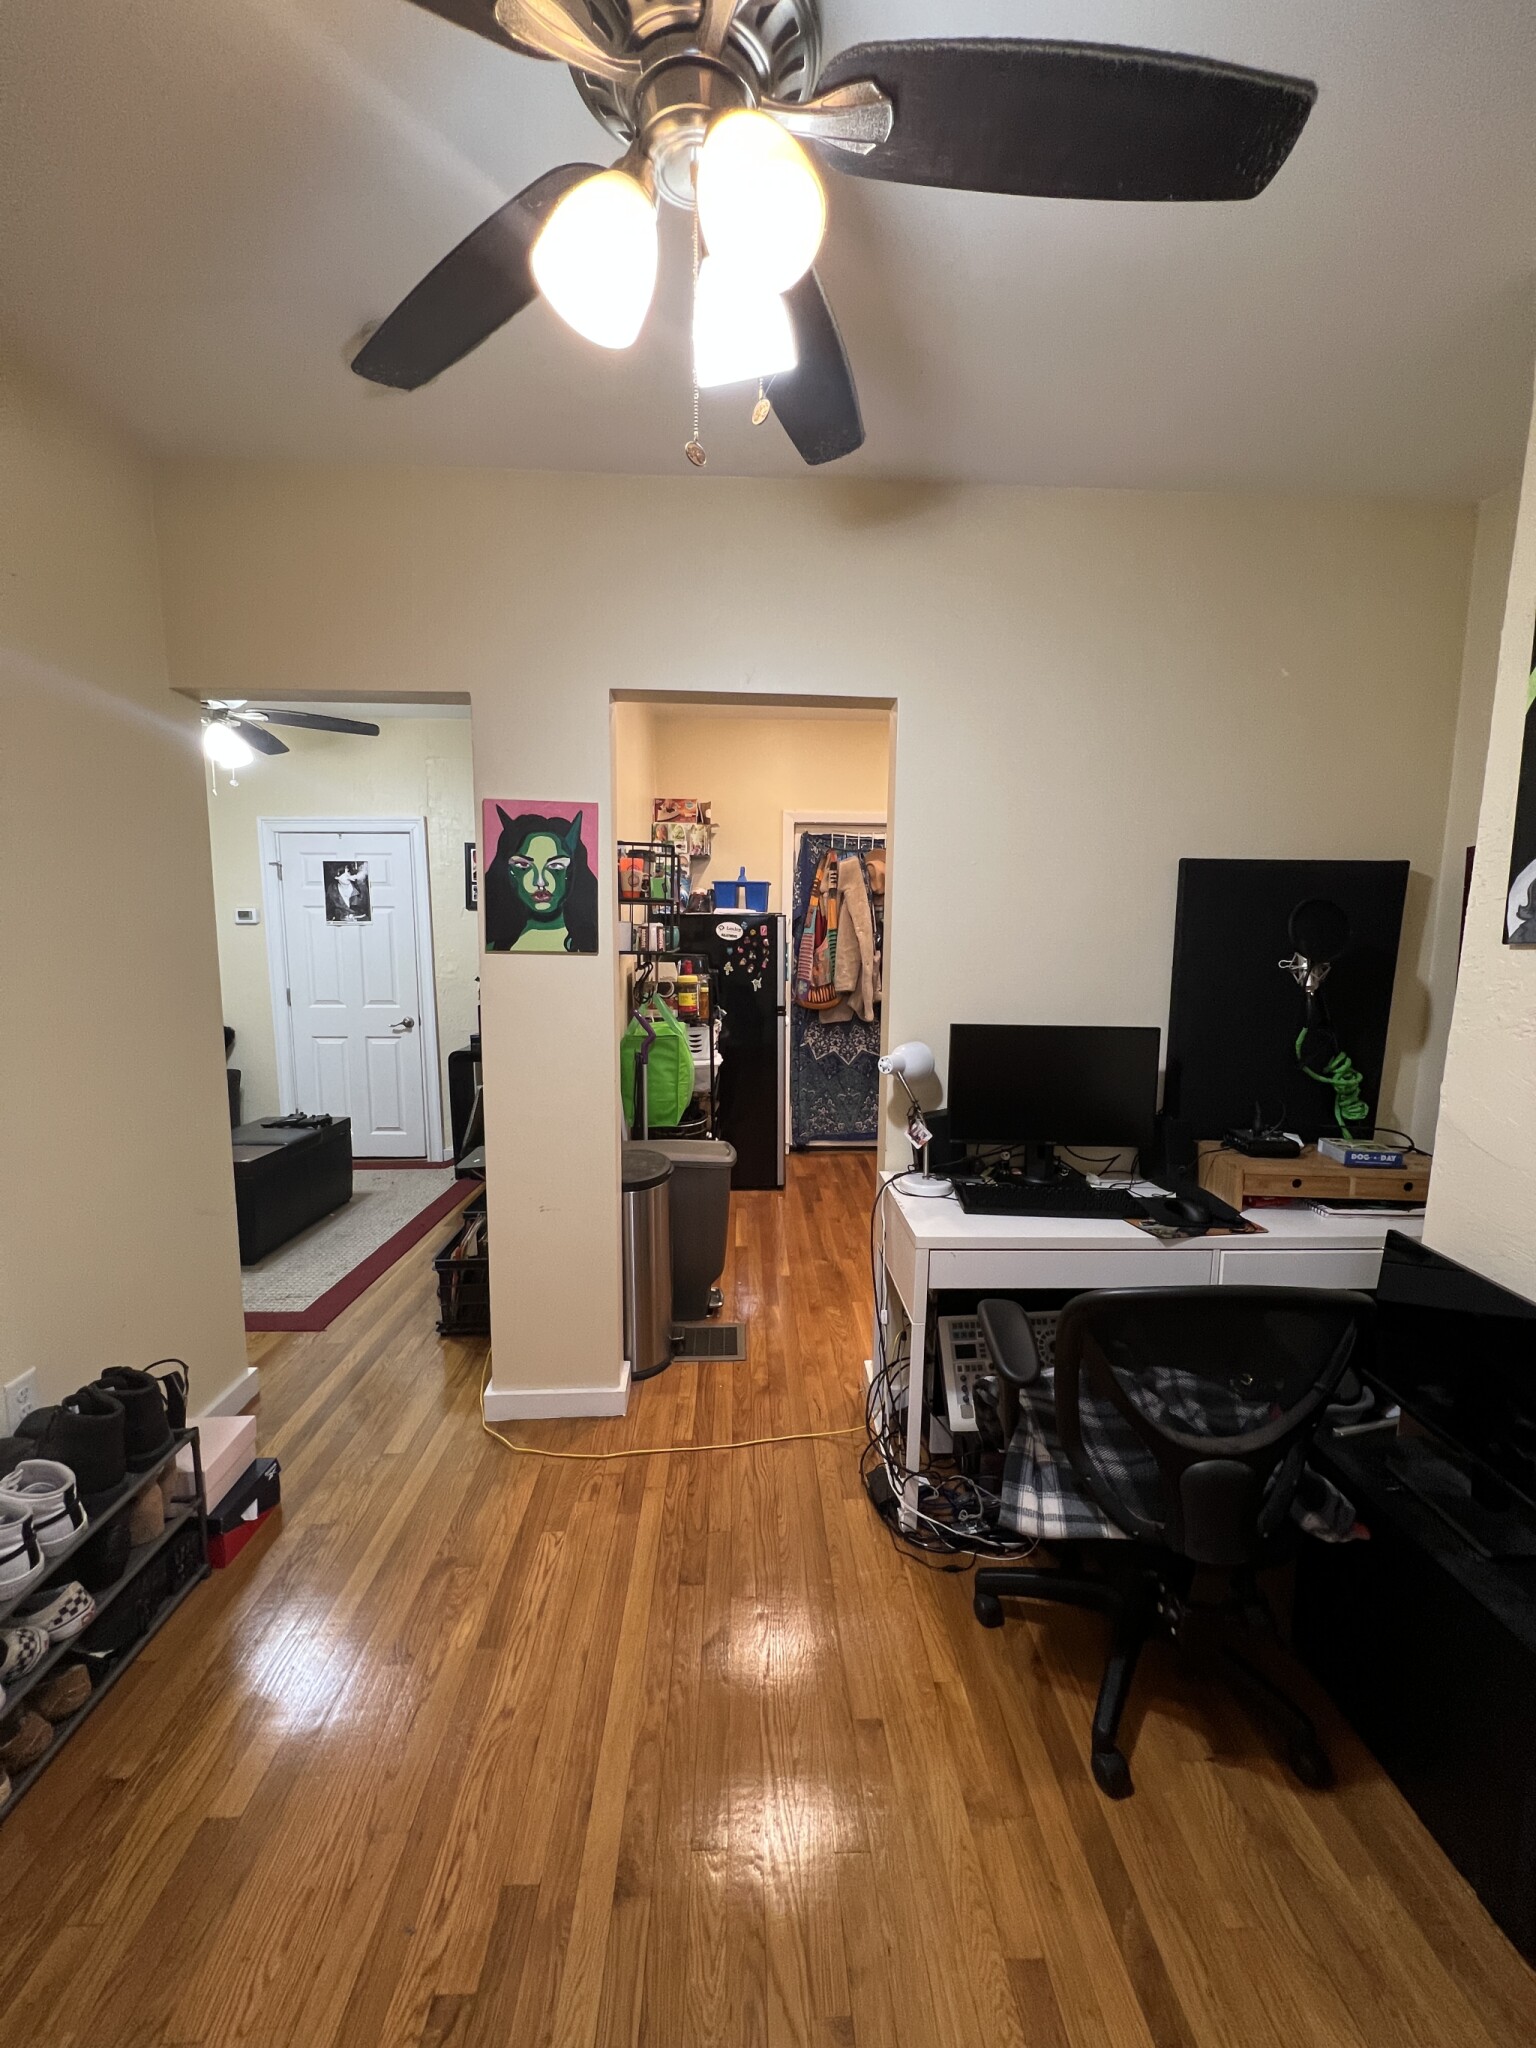 Photos of apartment on Great River Rd.,Somerville MA 02145